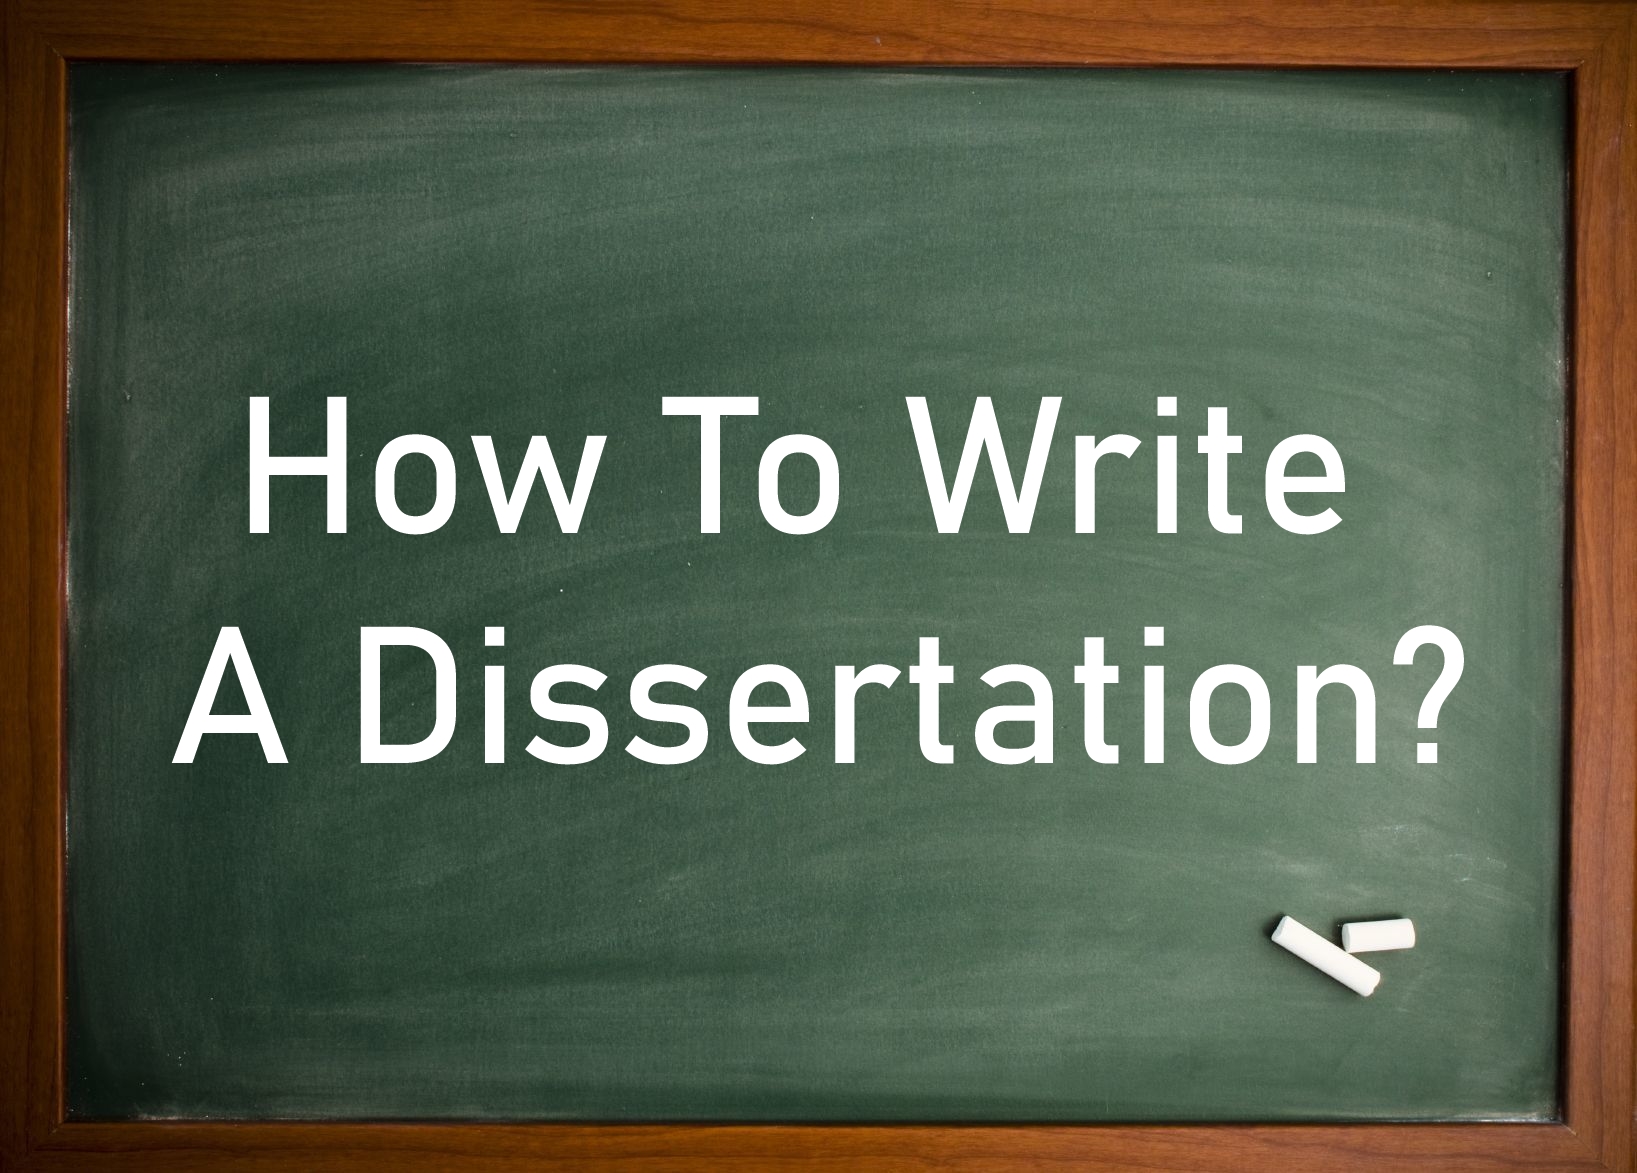 use dissertation in the sentence